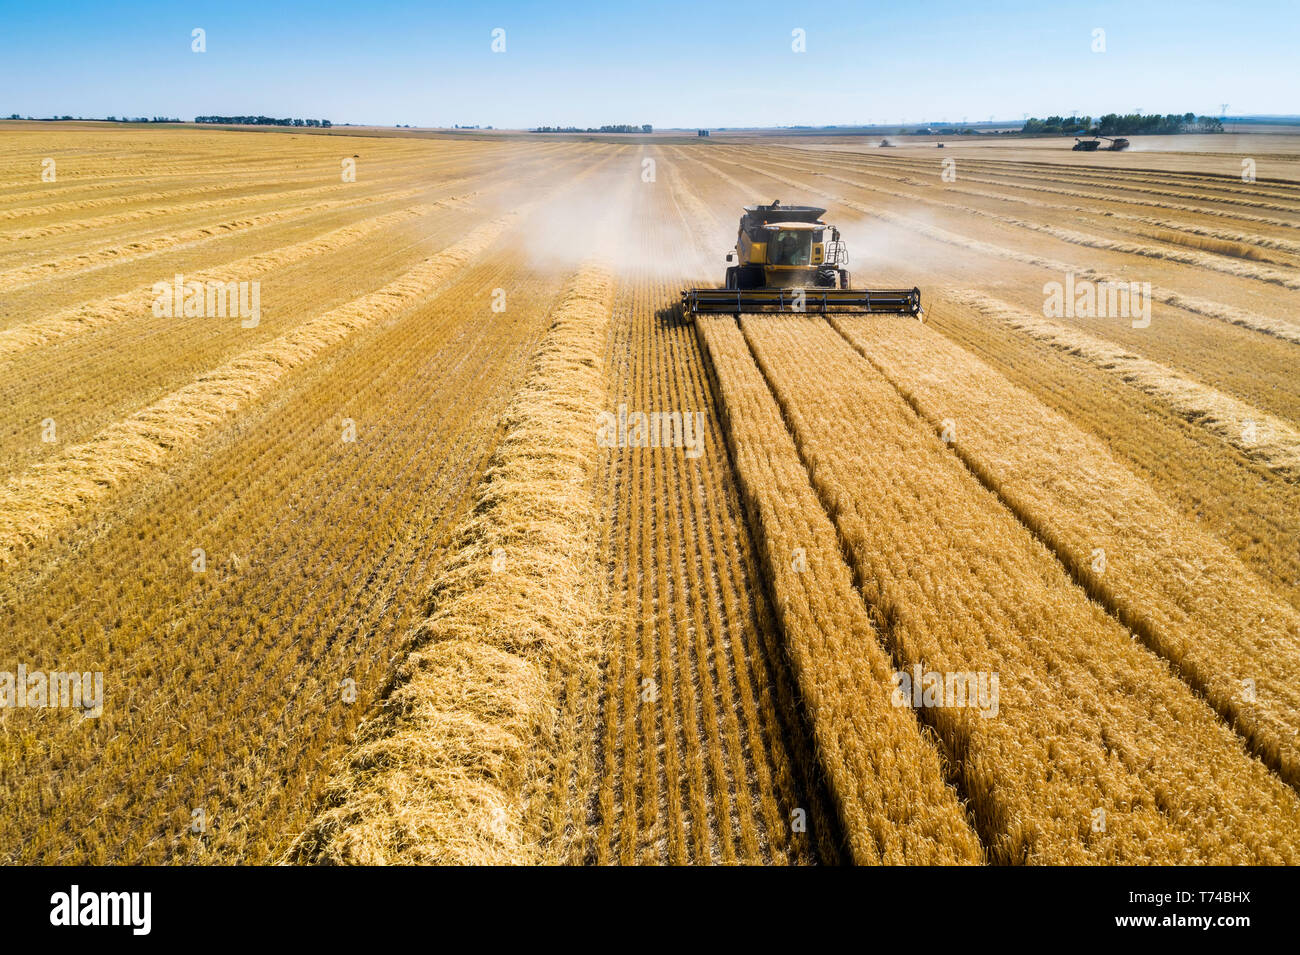 A combine harvesting a golden barley field with blue sky; Beiseker, Alberta, Canada Stock Photo